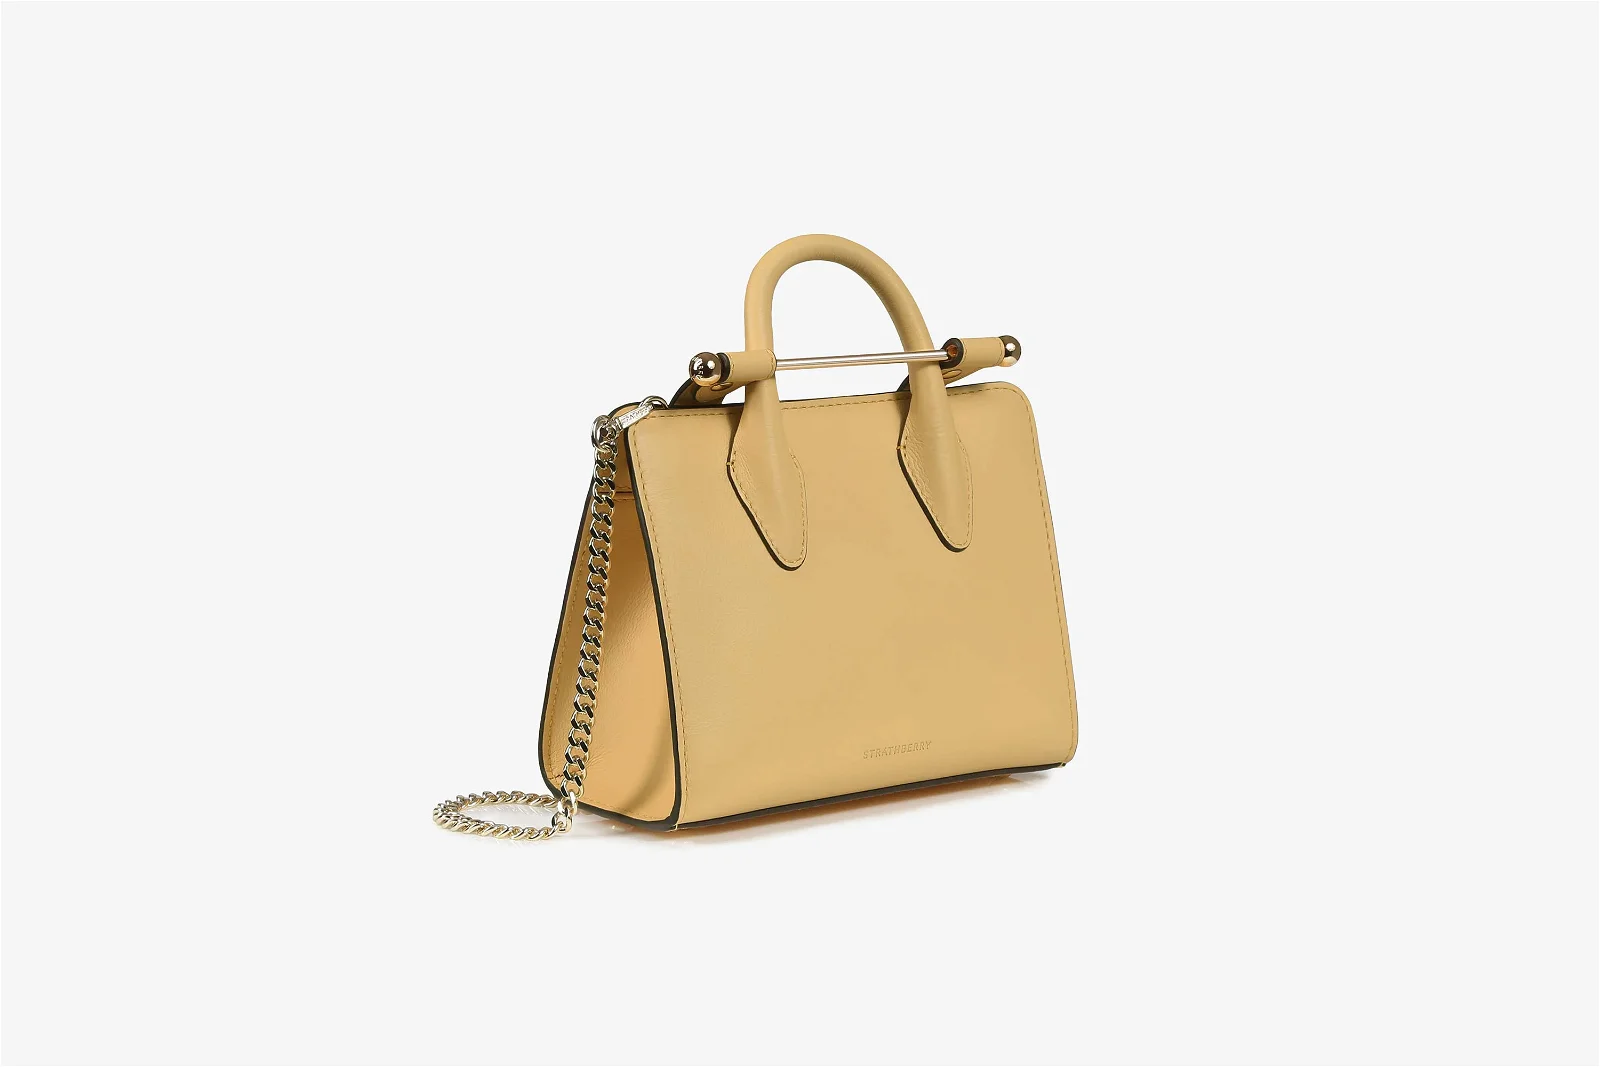 Strathberry Midi Leather Tote in Olive/Vanilla/Oat